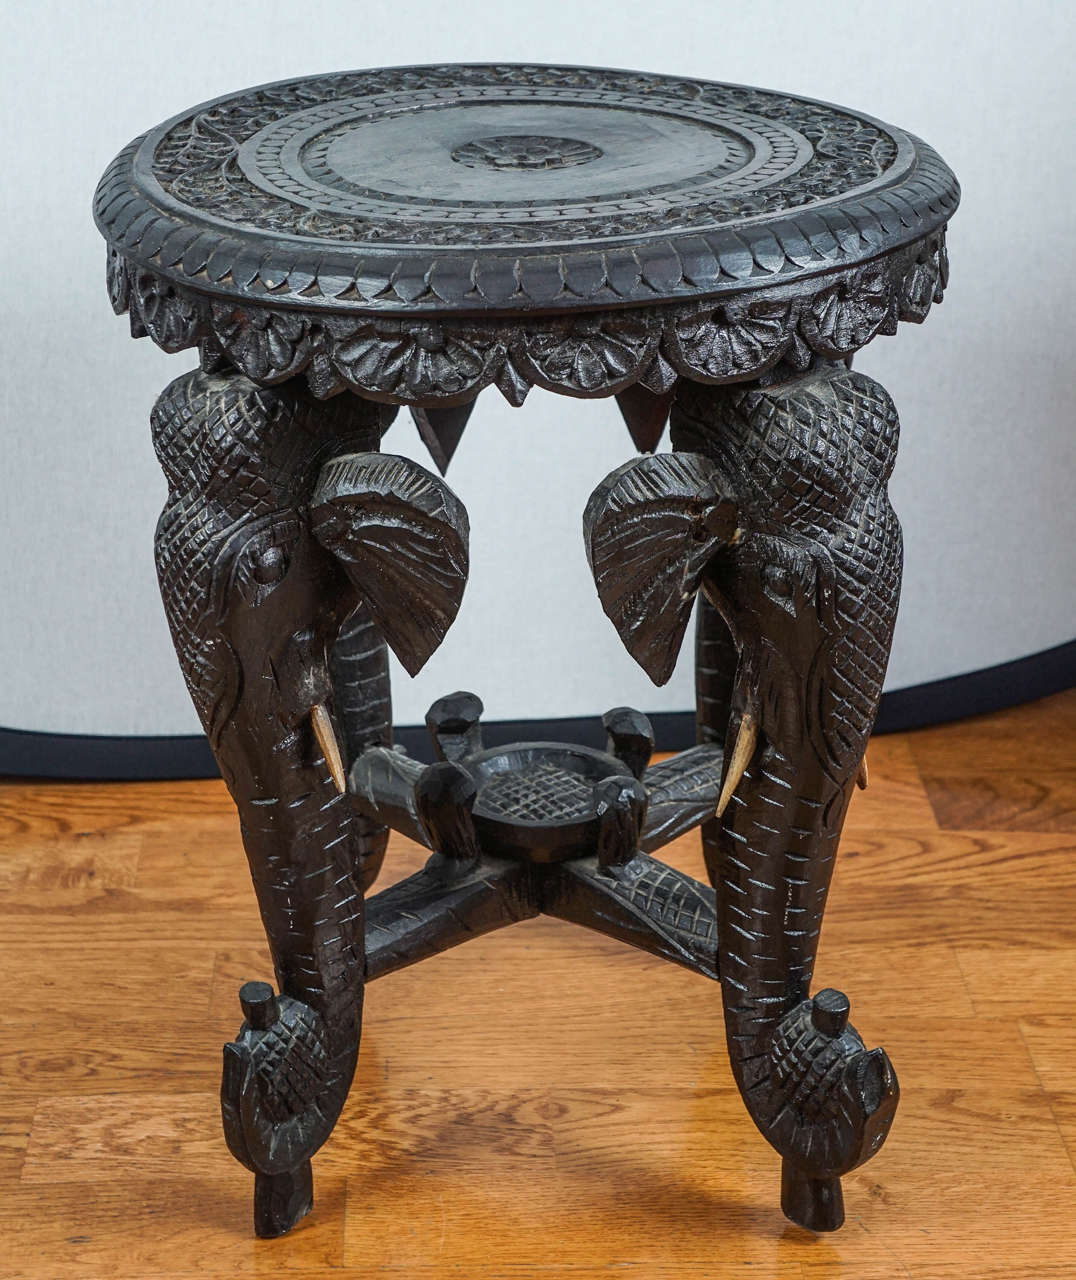 Vintage, intricate, hand carved round wooden, ebonized table.
Four elephant heads with faux ivory tusks form the legs of this unique table.